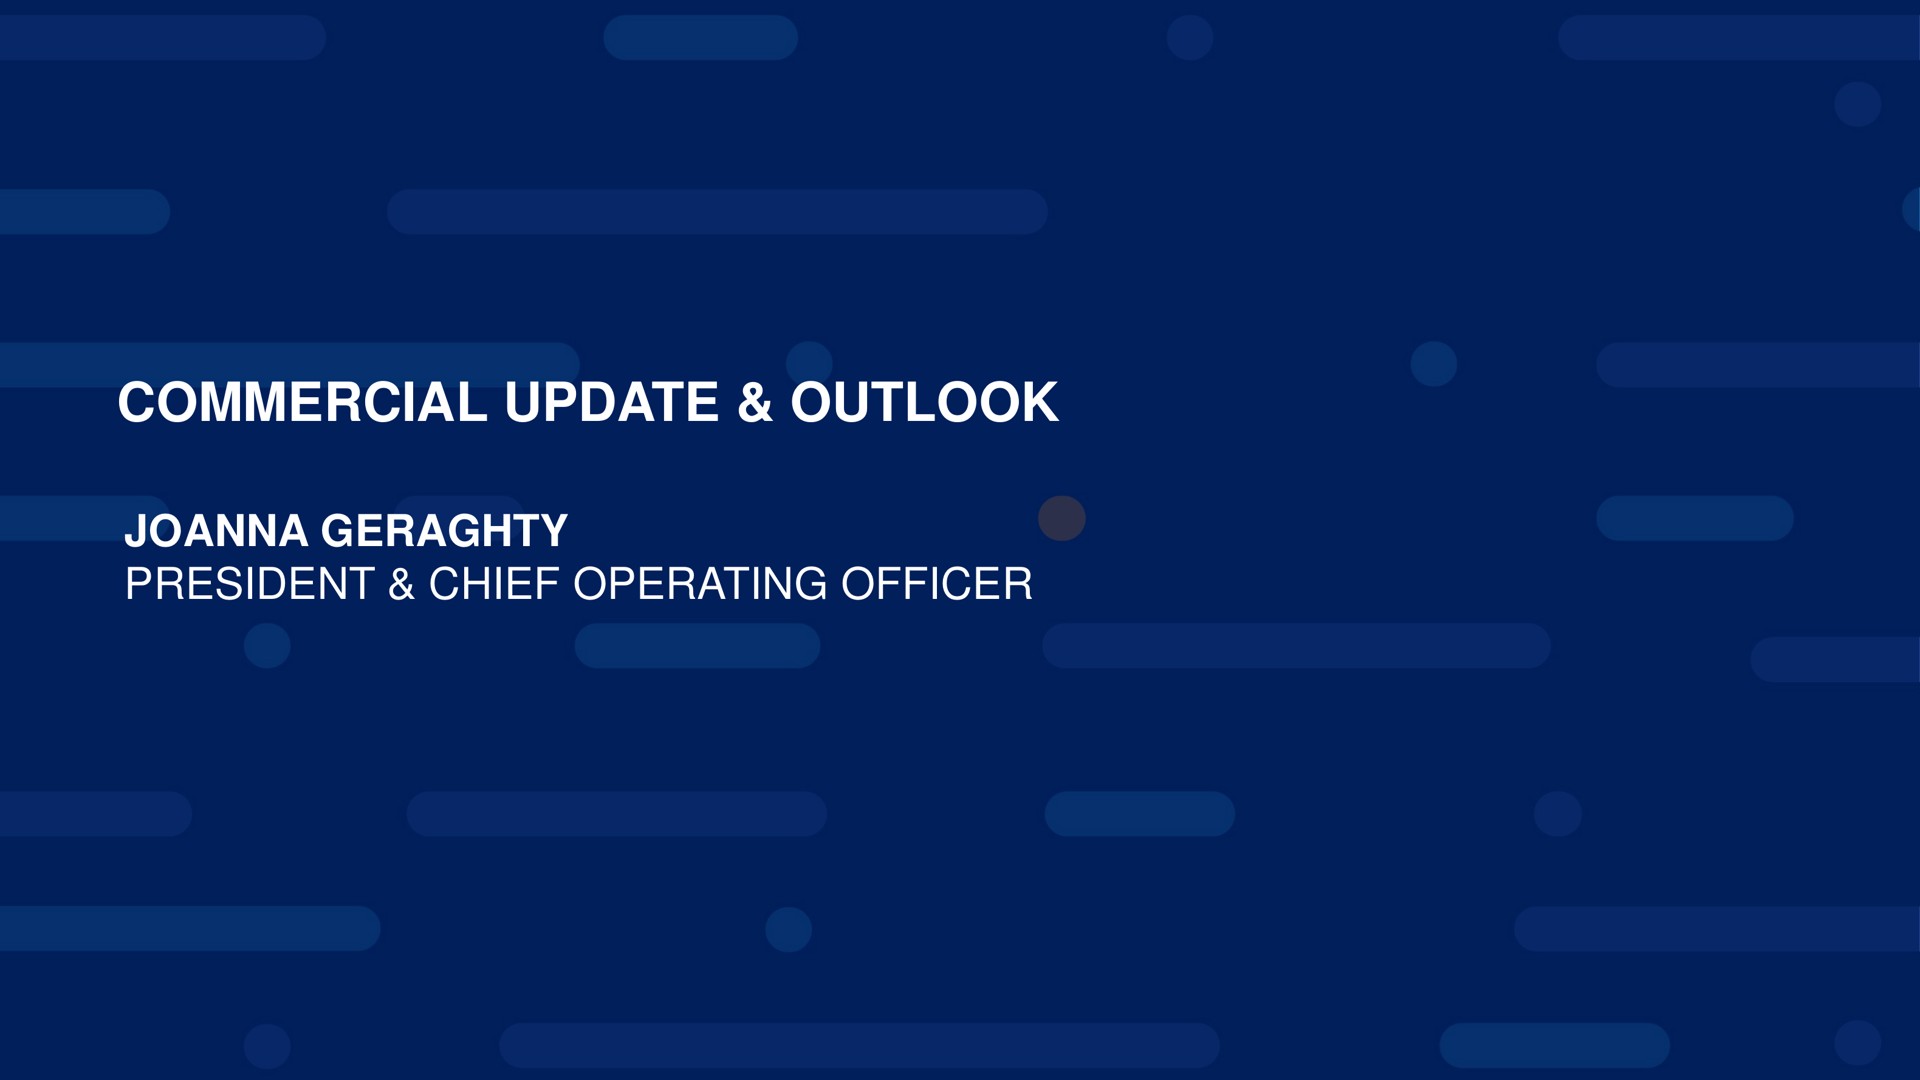 commercial update outlook president chief operating officer | jetBlue